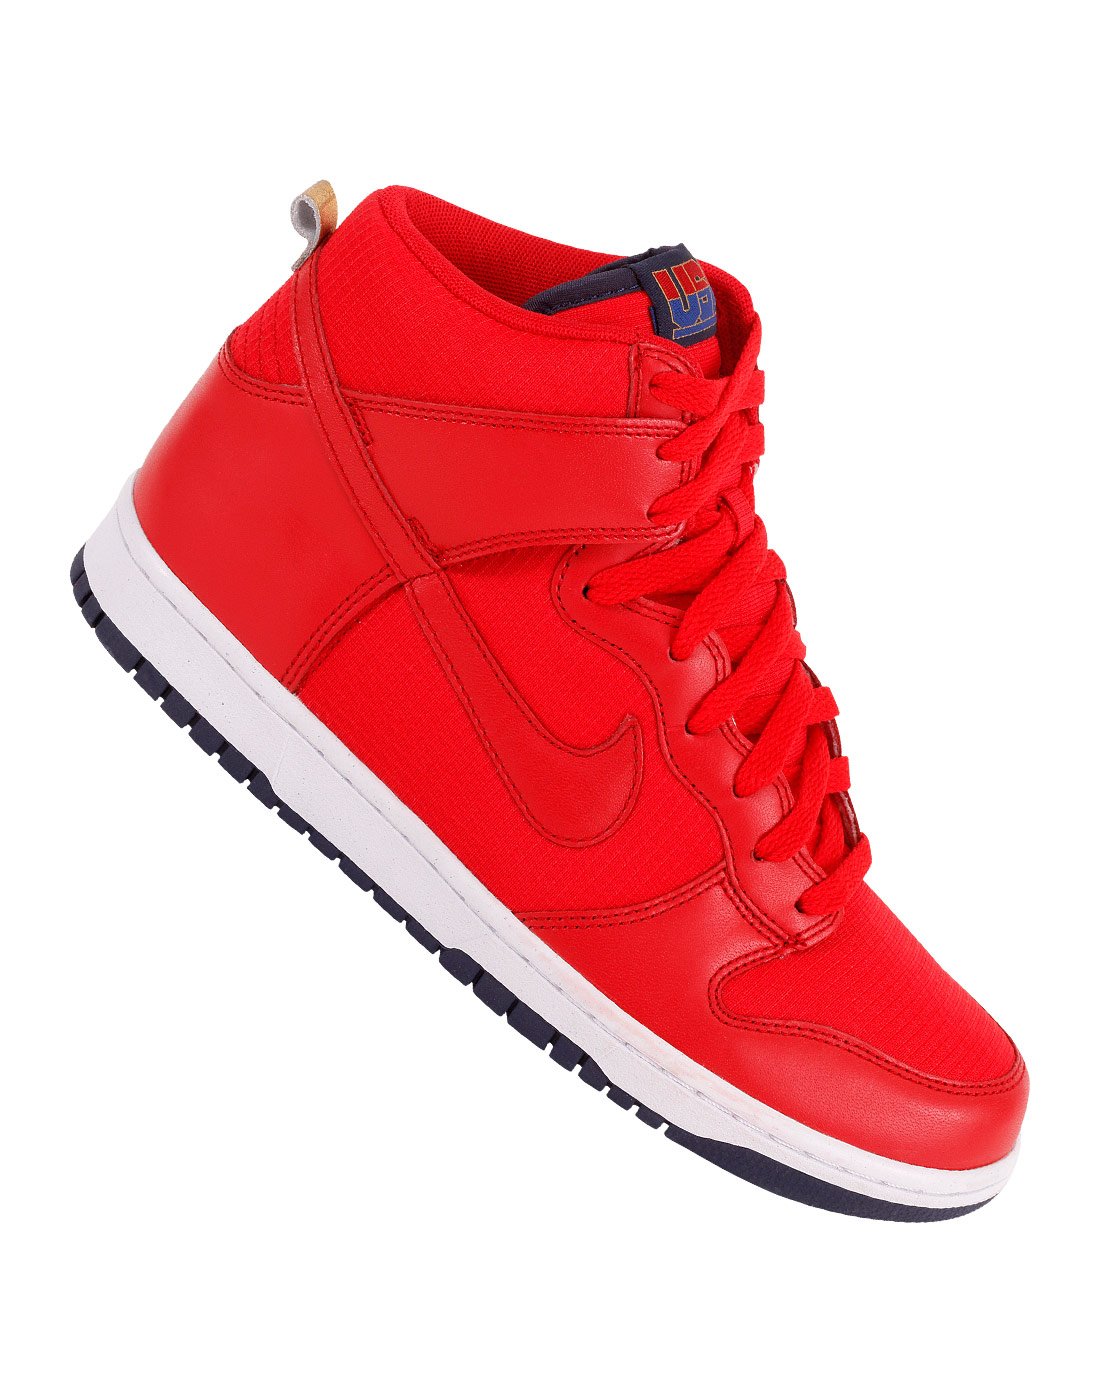 Nike Dunk High 'USA' - New Images